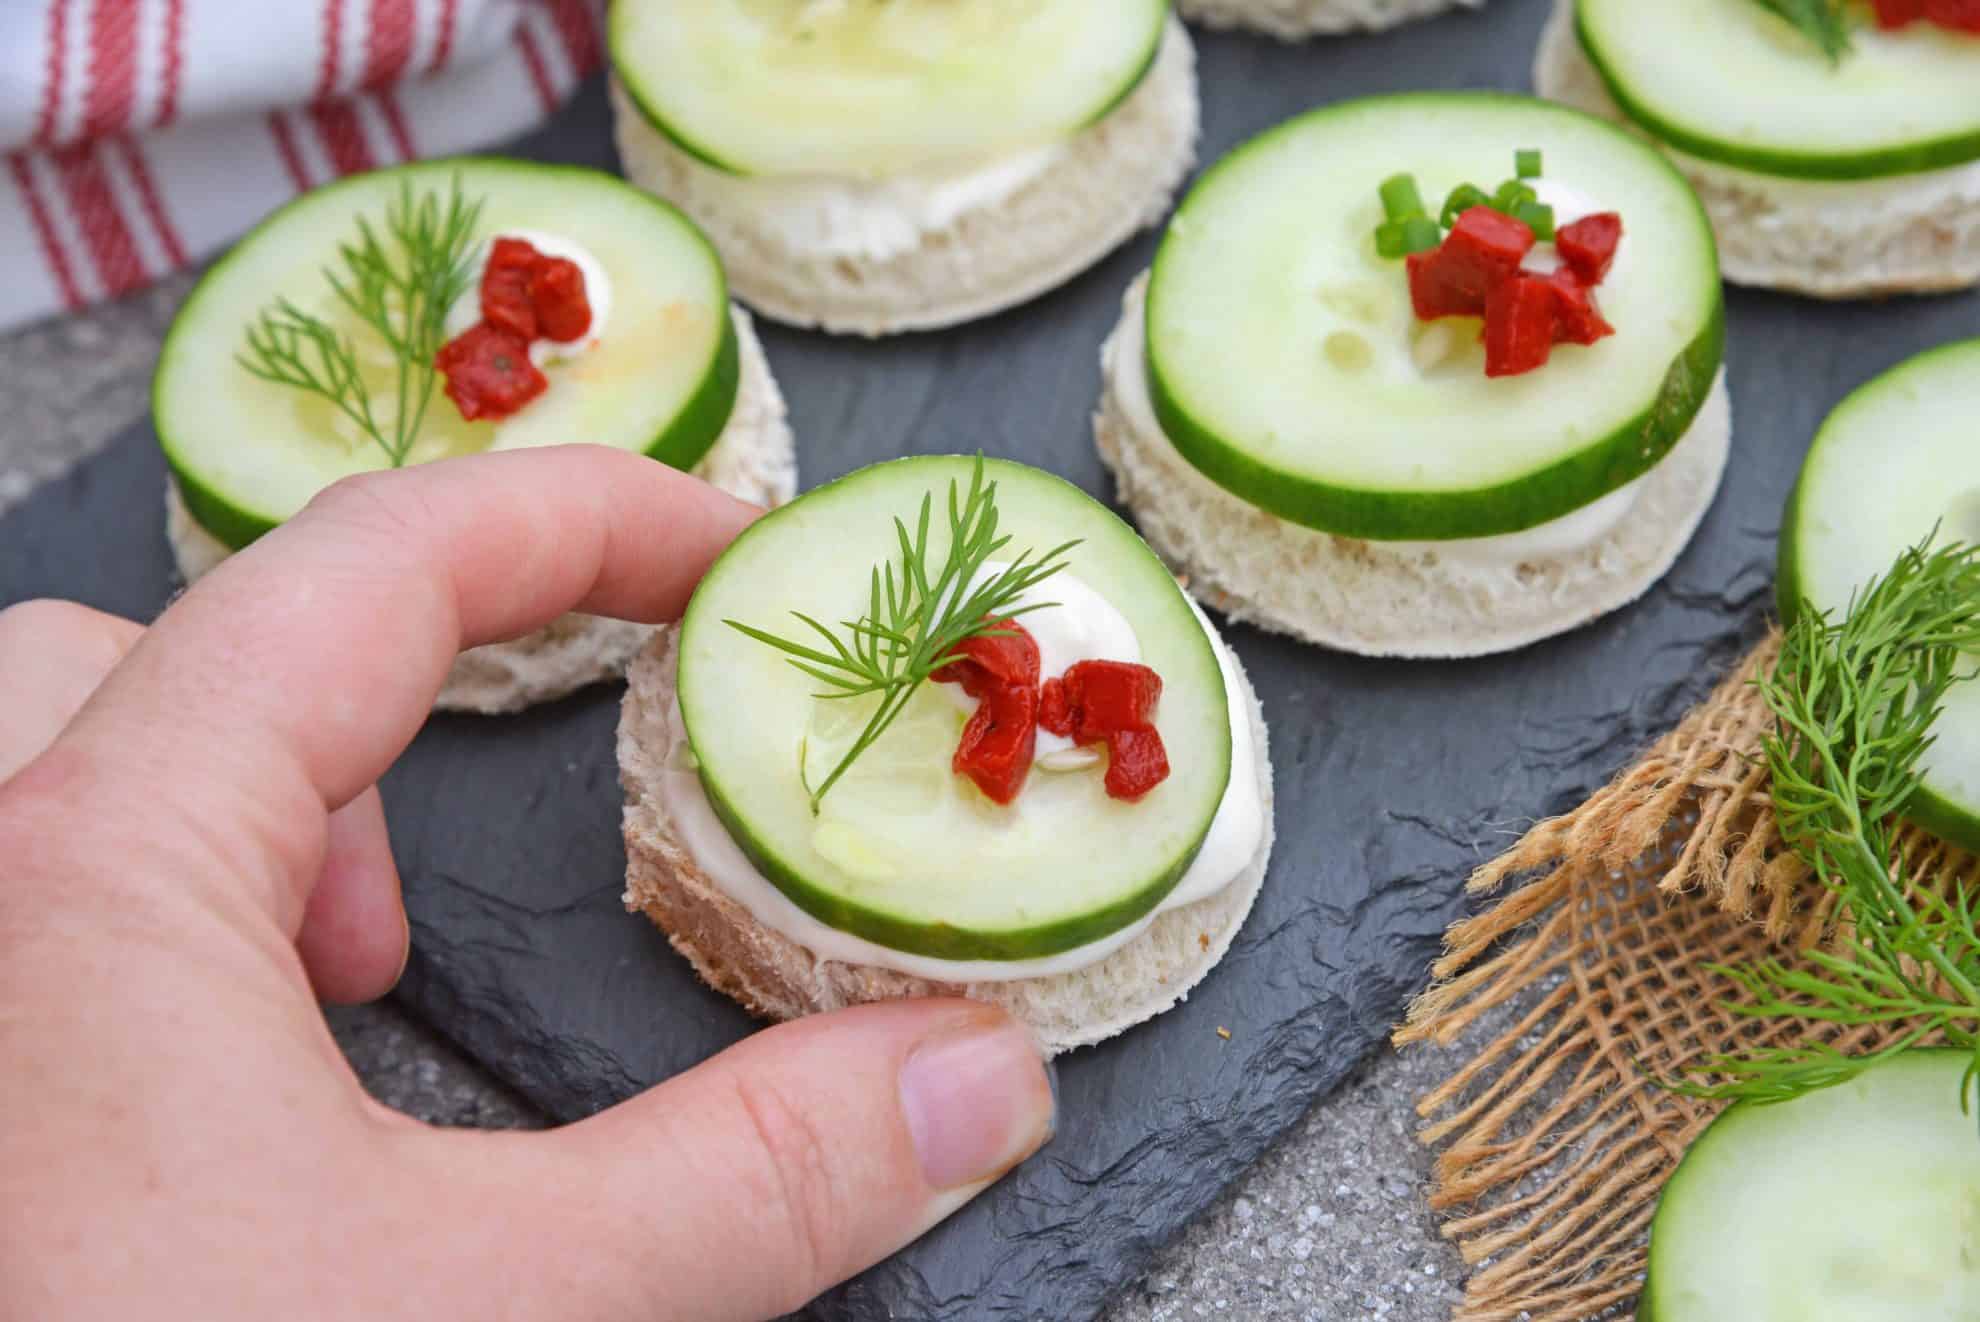 These Cucumber Sandwiches, or cucumber canapes, are easy tea sandwiches that are perfect for any get-together, including holiday parties. #cucumbersandwiches #cucumbercanapes #teasandwiches www.savoryexperiments.com